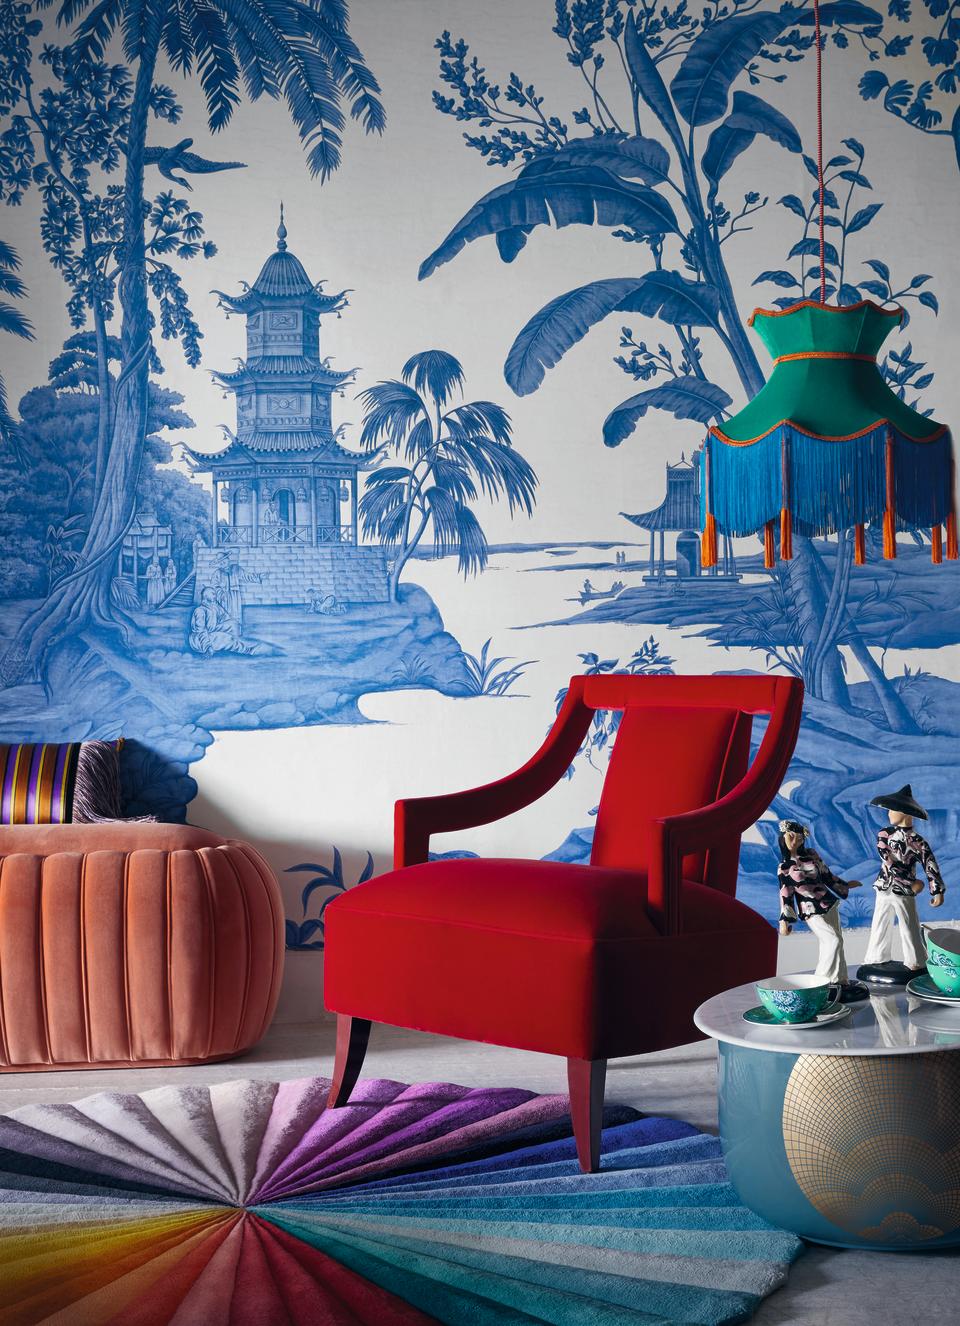 A living room with a bold red chair and blue wallpaper